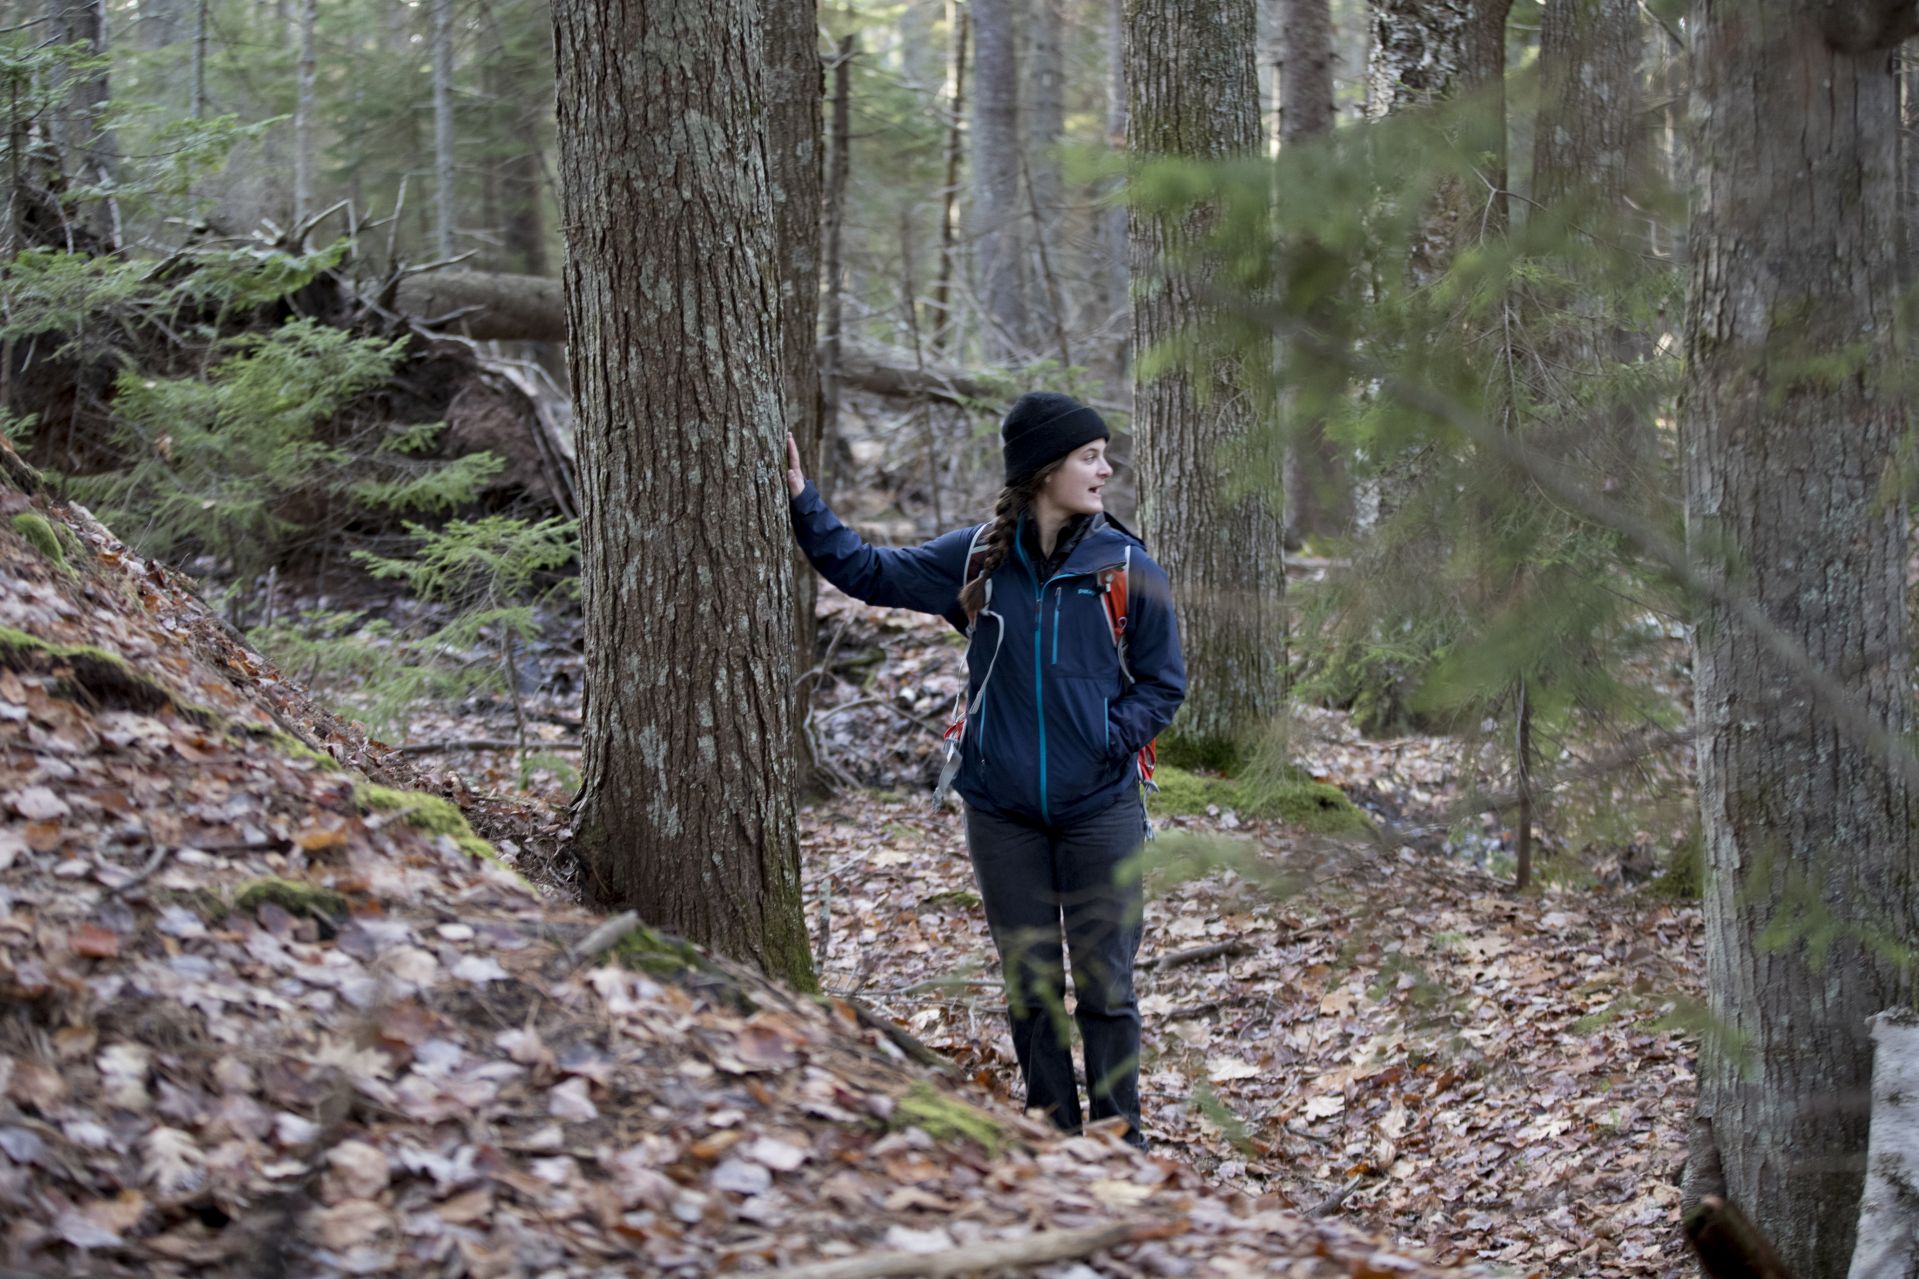 Seen in 2017, Isobel Curtis '17 takes a tree core sample at Bates–Morse Mountain, part of a project to establish forest survey plots at the conservation area. The plots are part of a multigroup effort to monitor significant Maine ecosystems in the face of climate change. (Phyllis Graber Jensen/Bates College).(Phyllis Graber Jensen/Bates College)